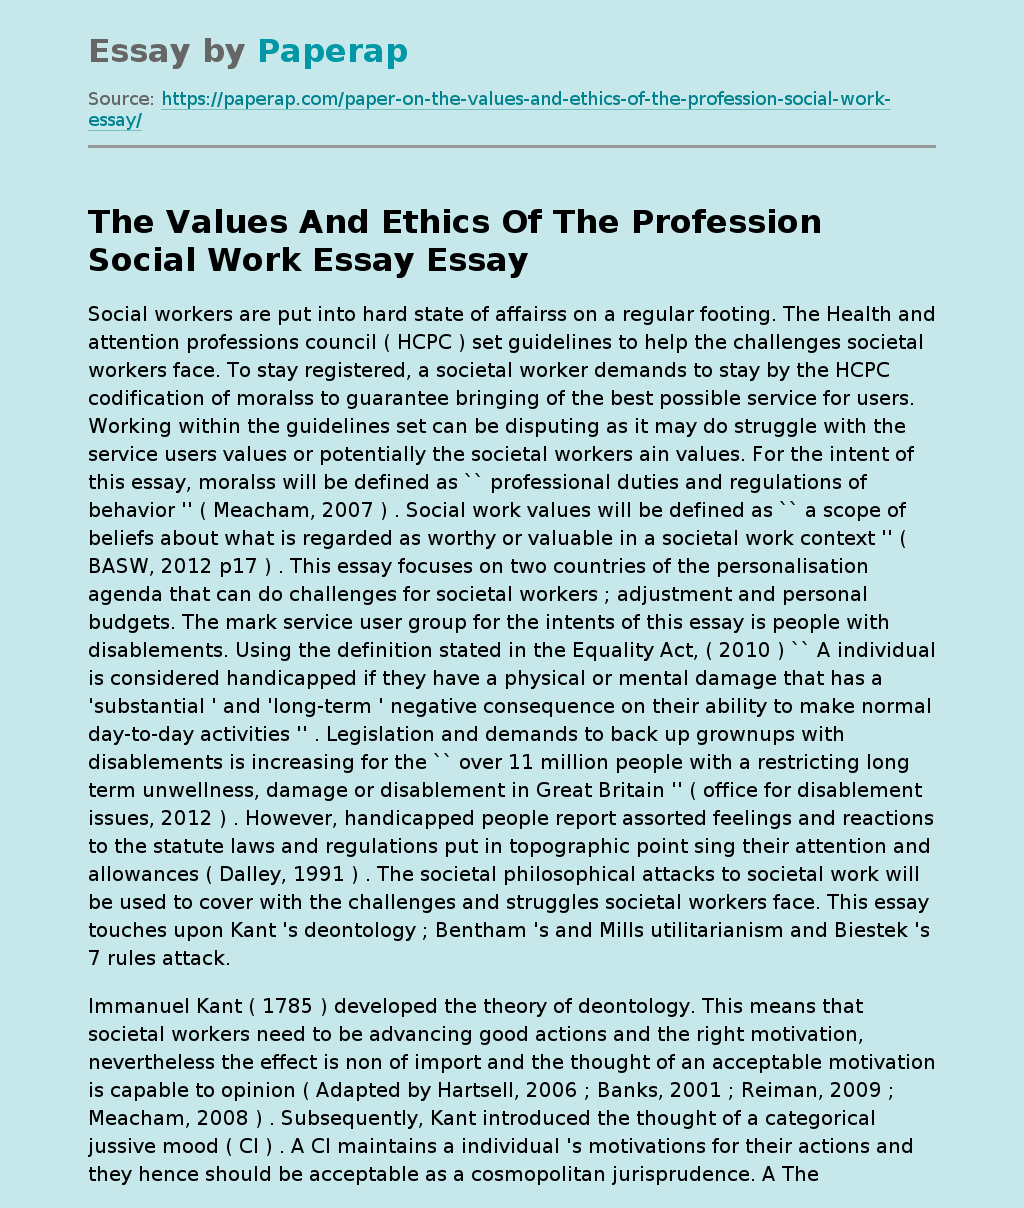 The Values And Ethics Of The Profession Social Work Essay